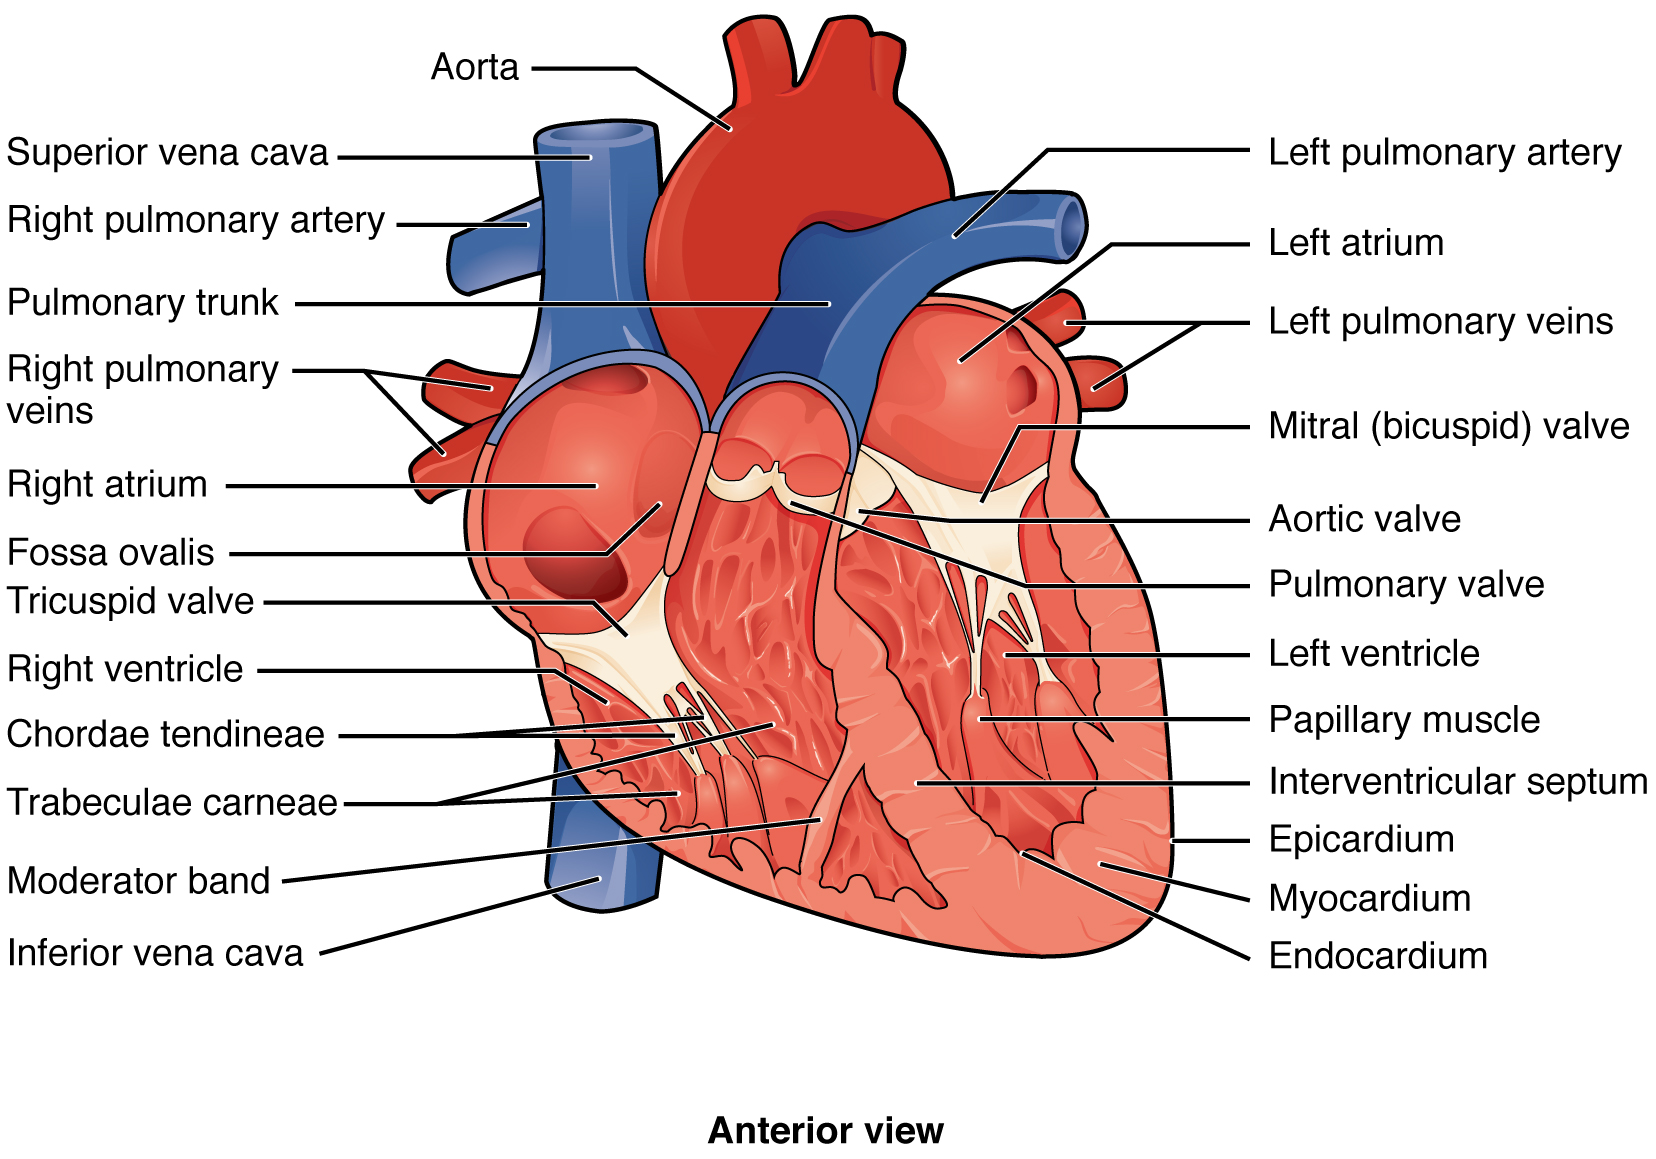 Labeled diagram of the internal anatomy visible in an anterior view of a frontal section of the heart.